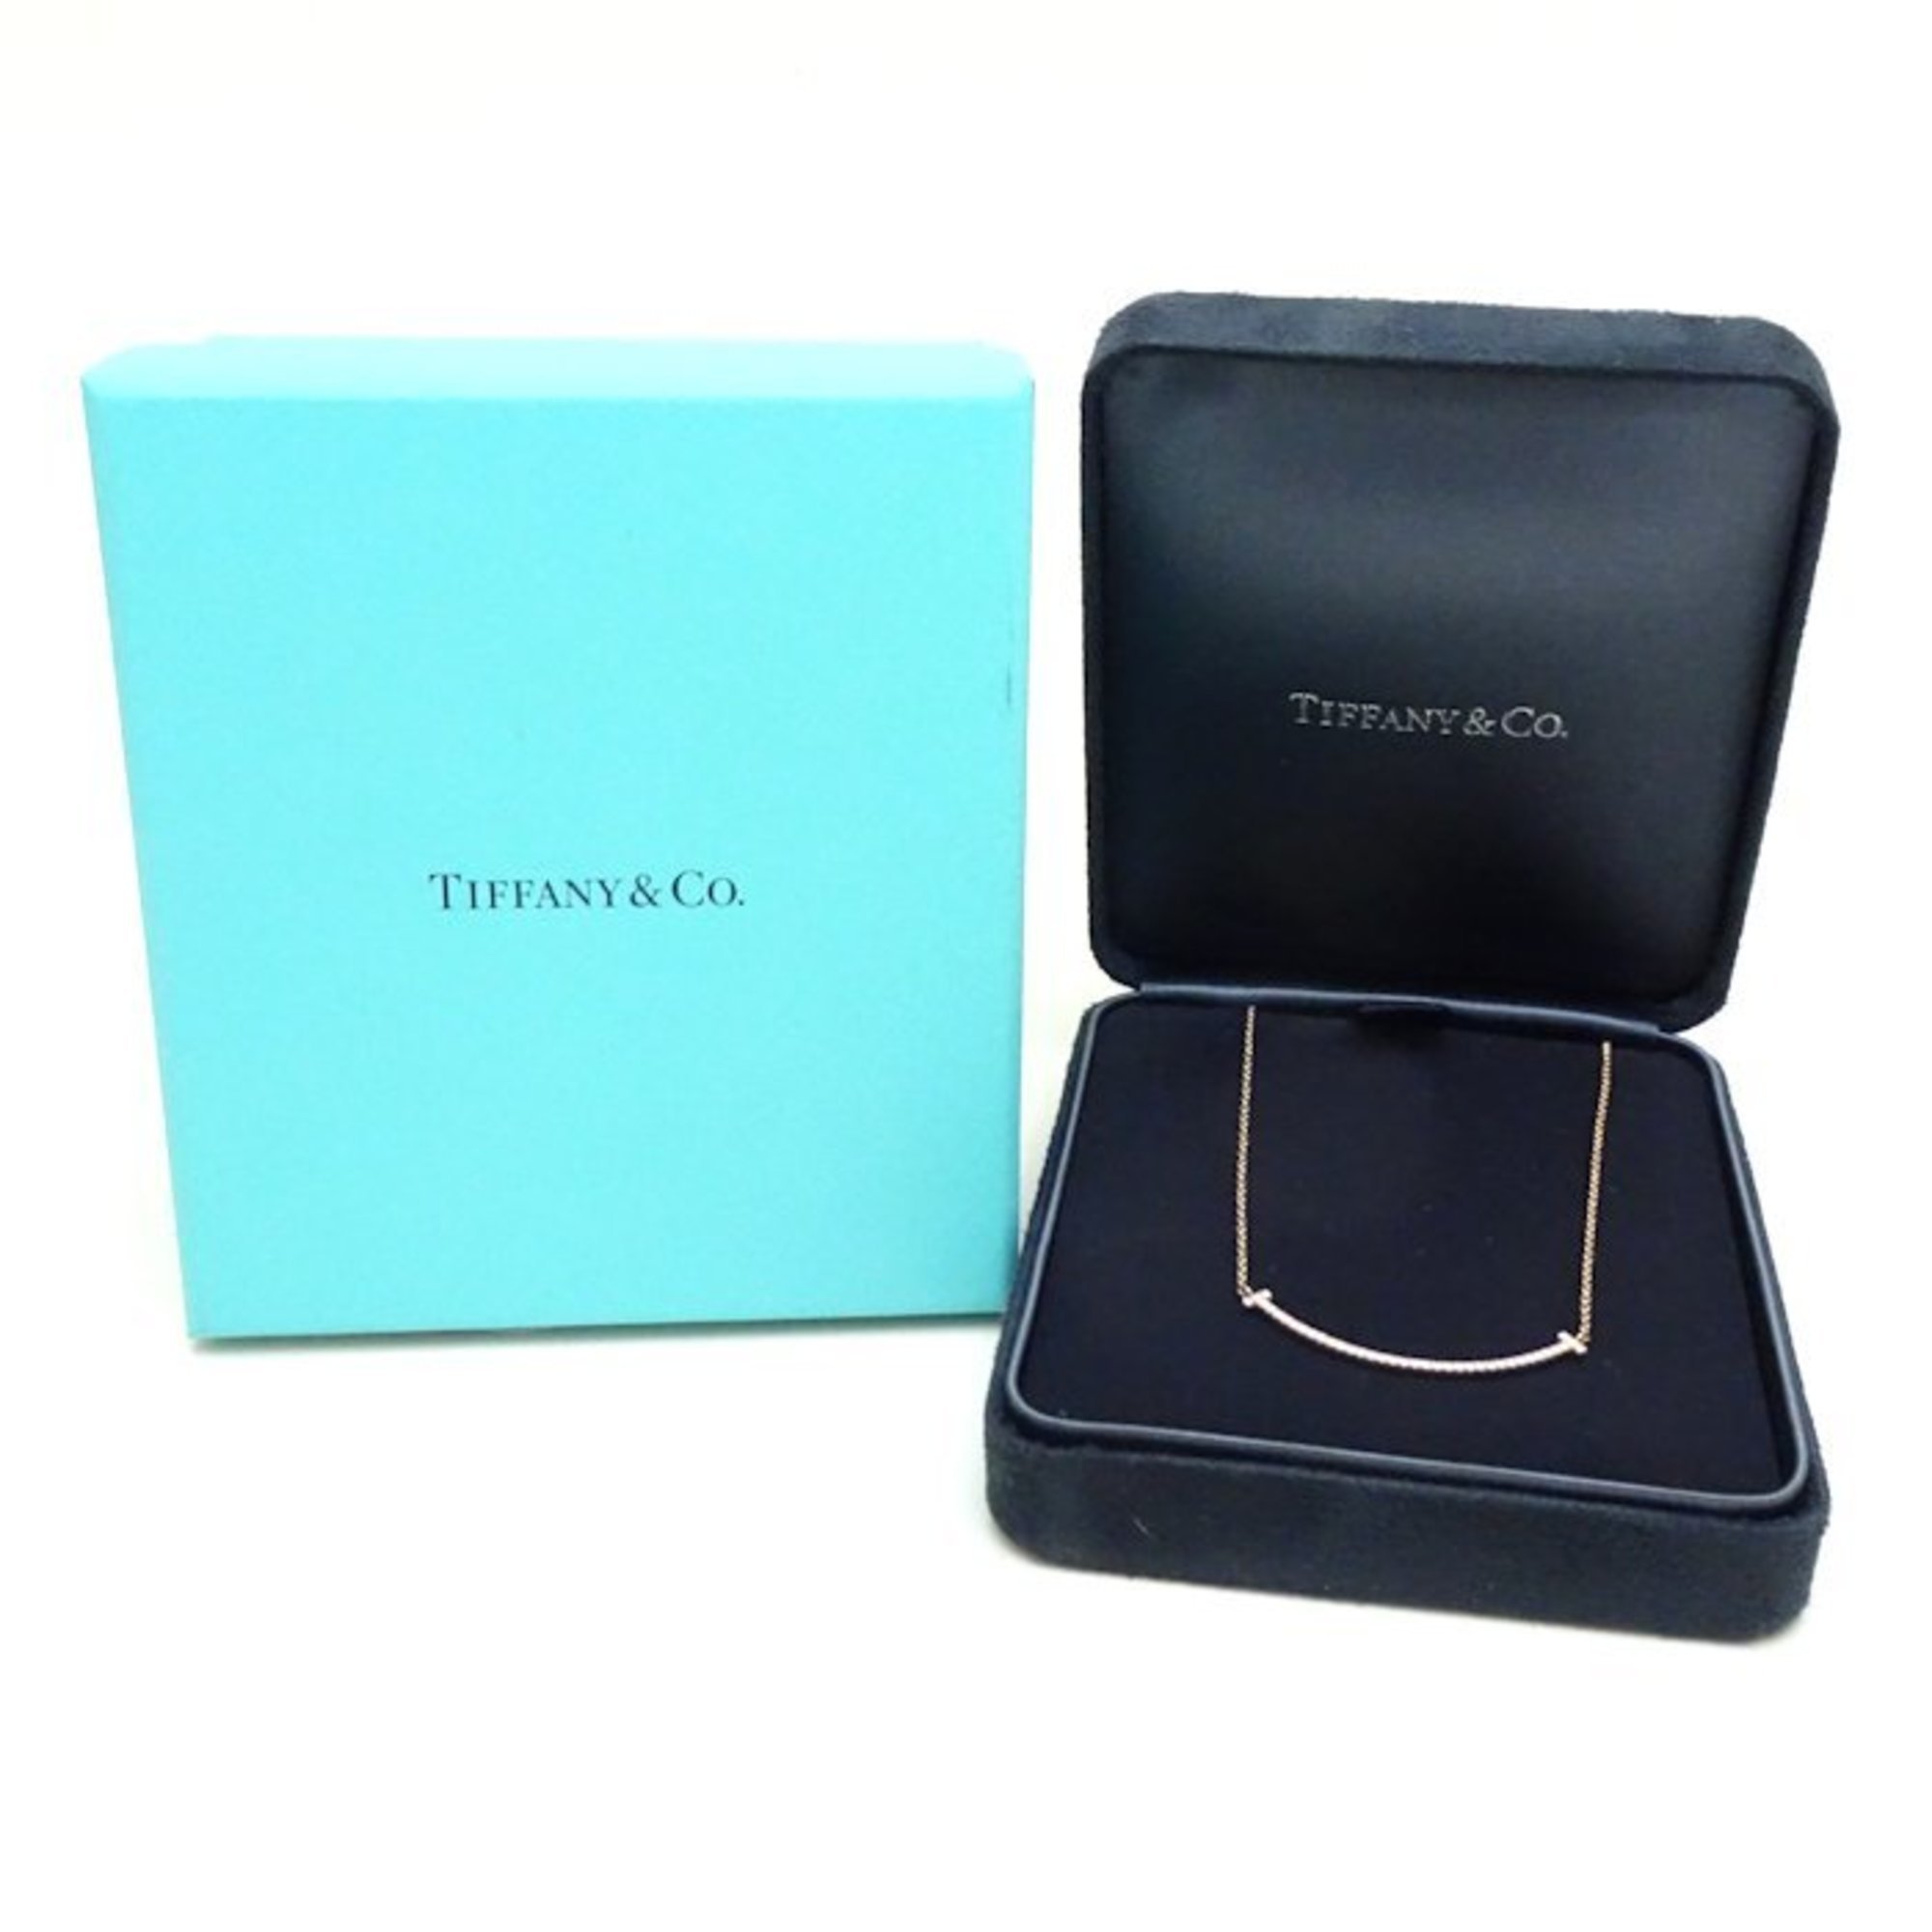 TIFFANY&Co. Tiffany T Smile Necklace Small Diamond 750PG Pink Gold K18RG Rose 291646